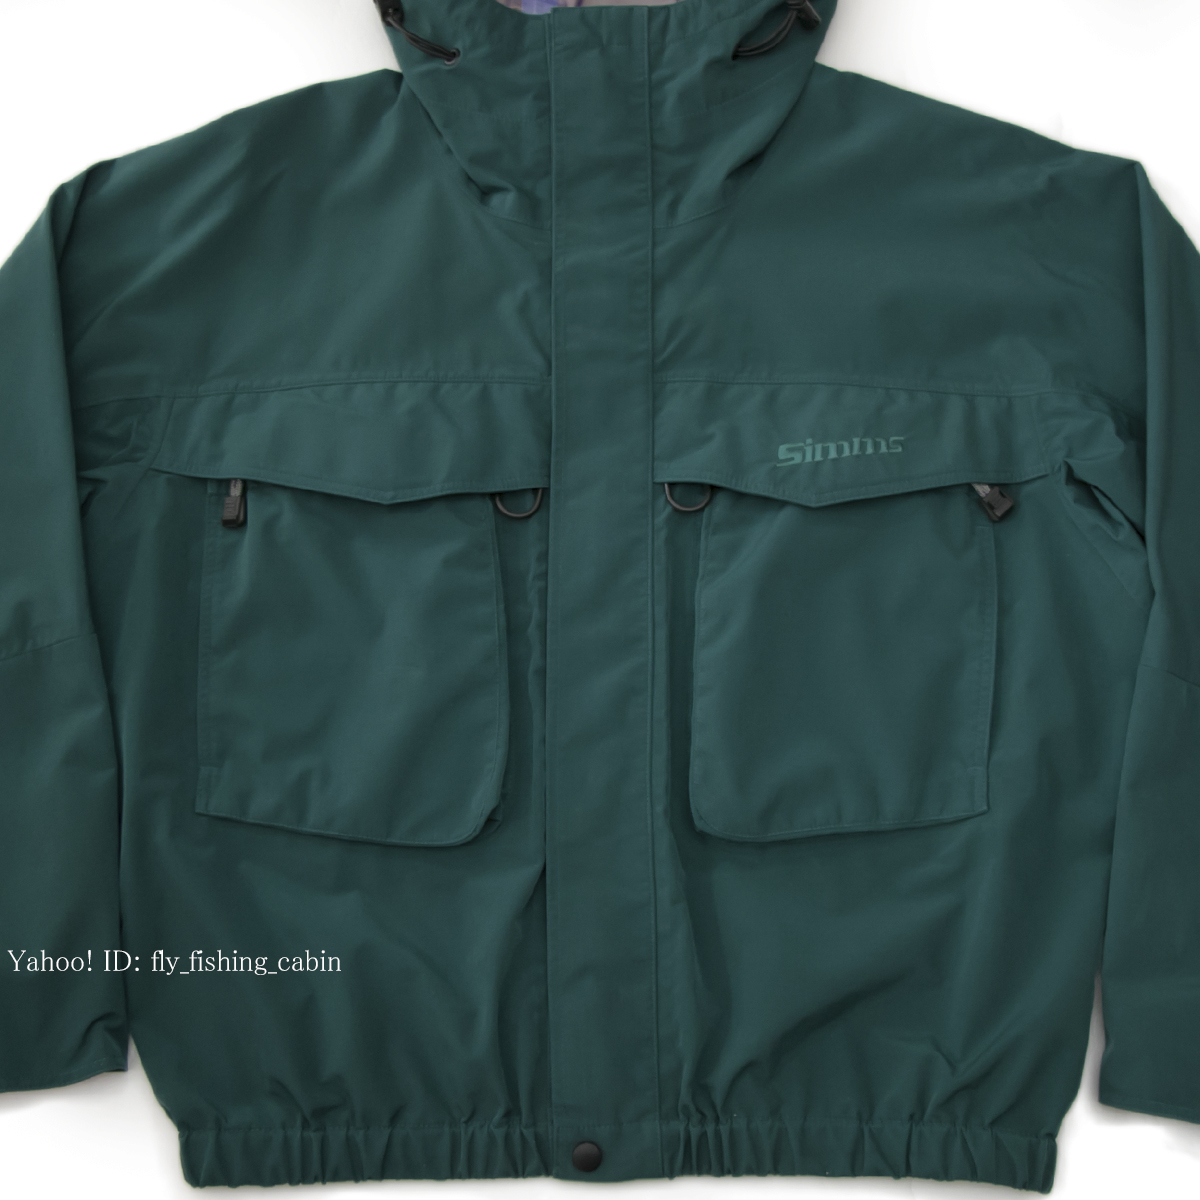  secondhand goods!SIMMS Syms Gore-Tex dry coat forest green US-S